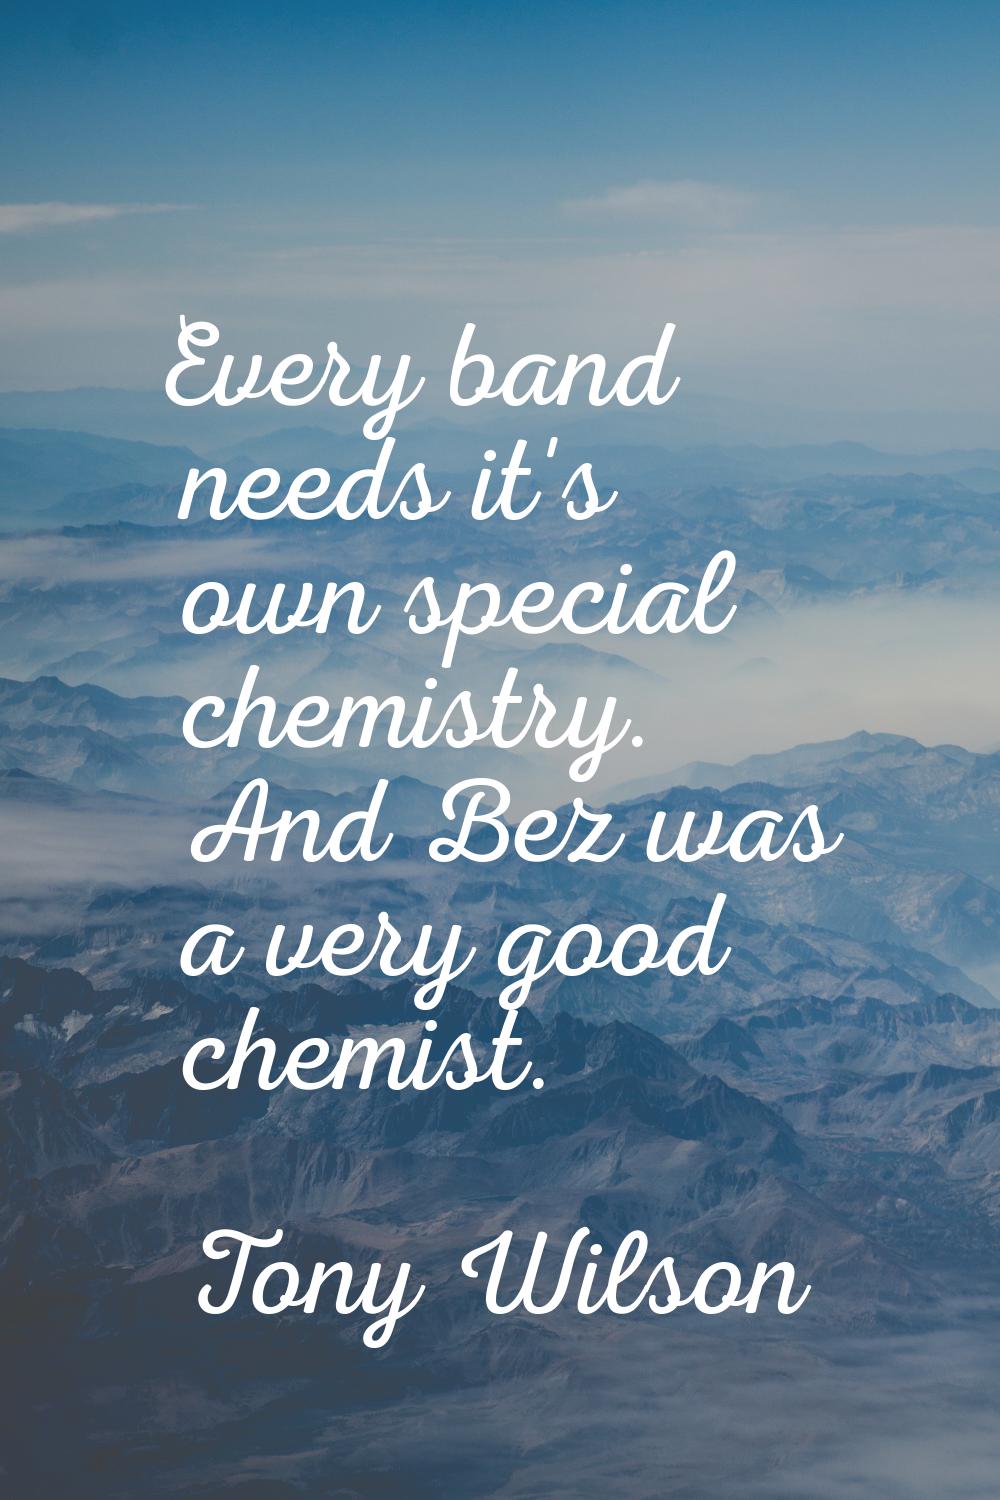 Every band needs it's own special chemistry. And Bez was a very good chemist.